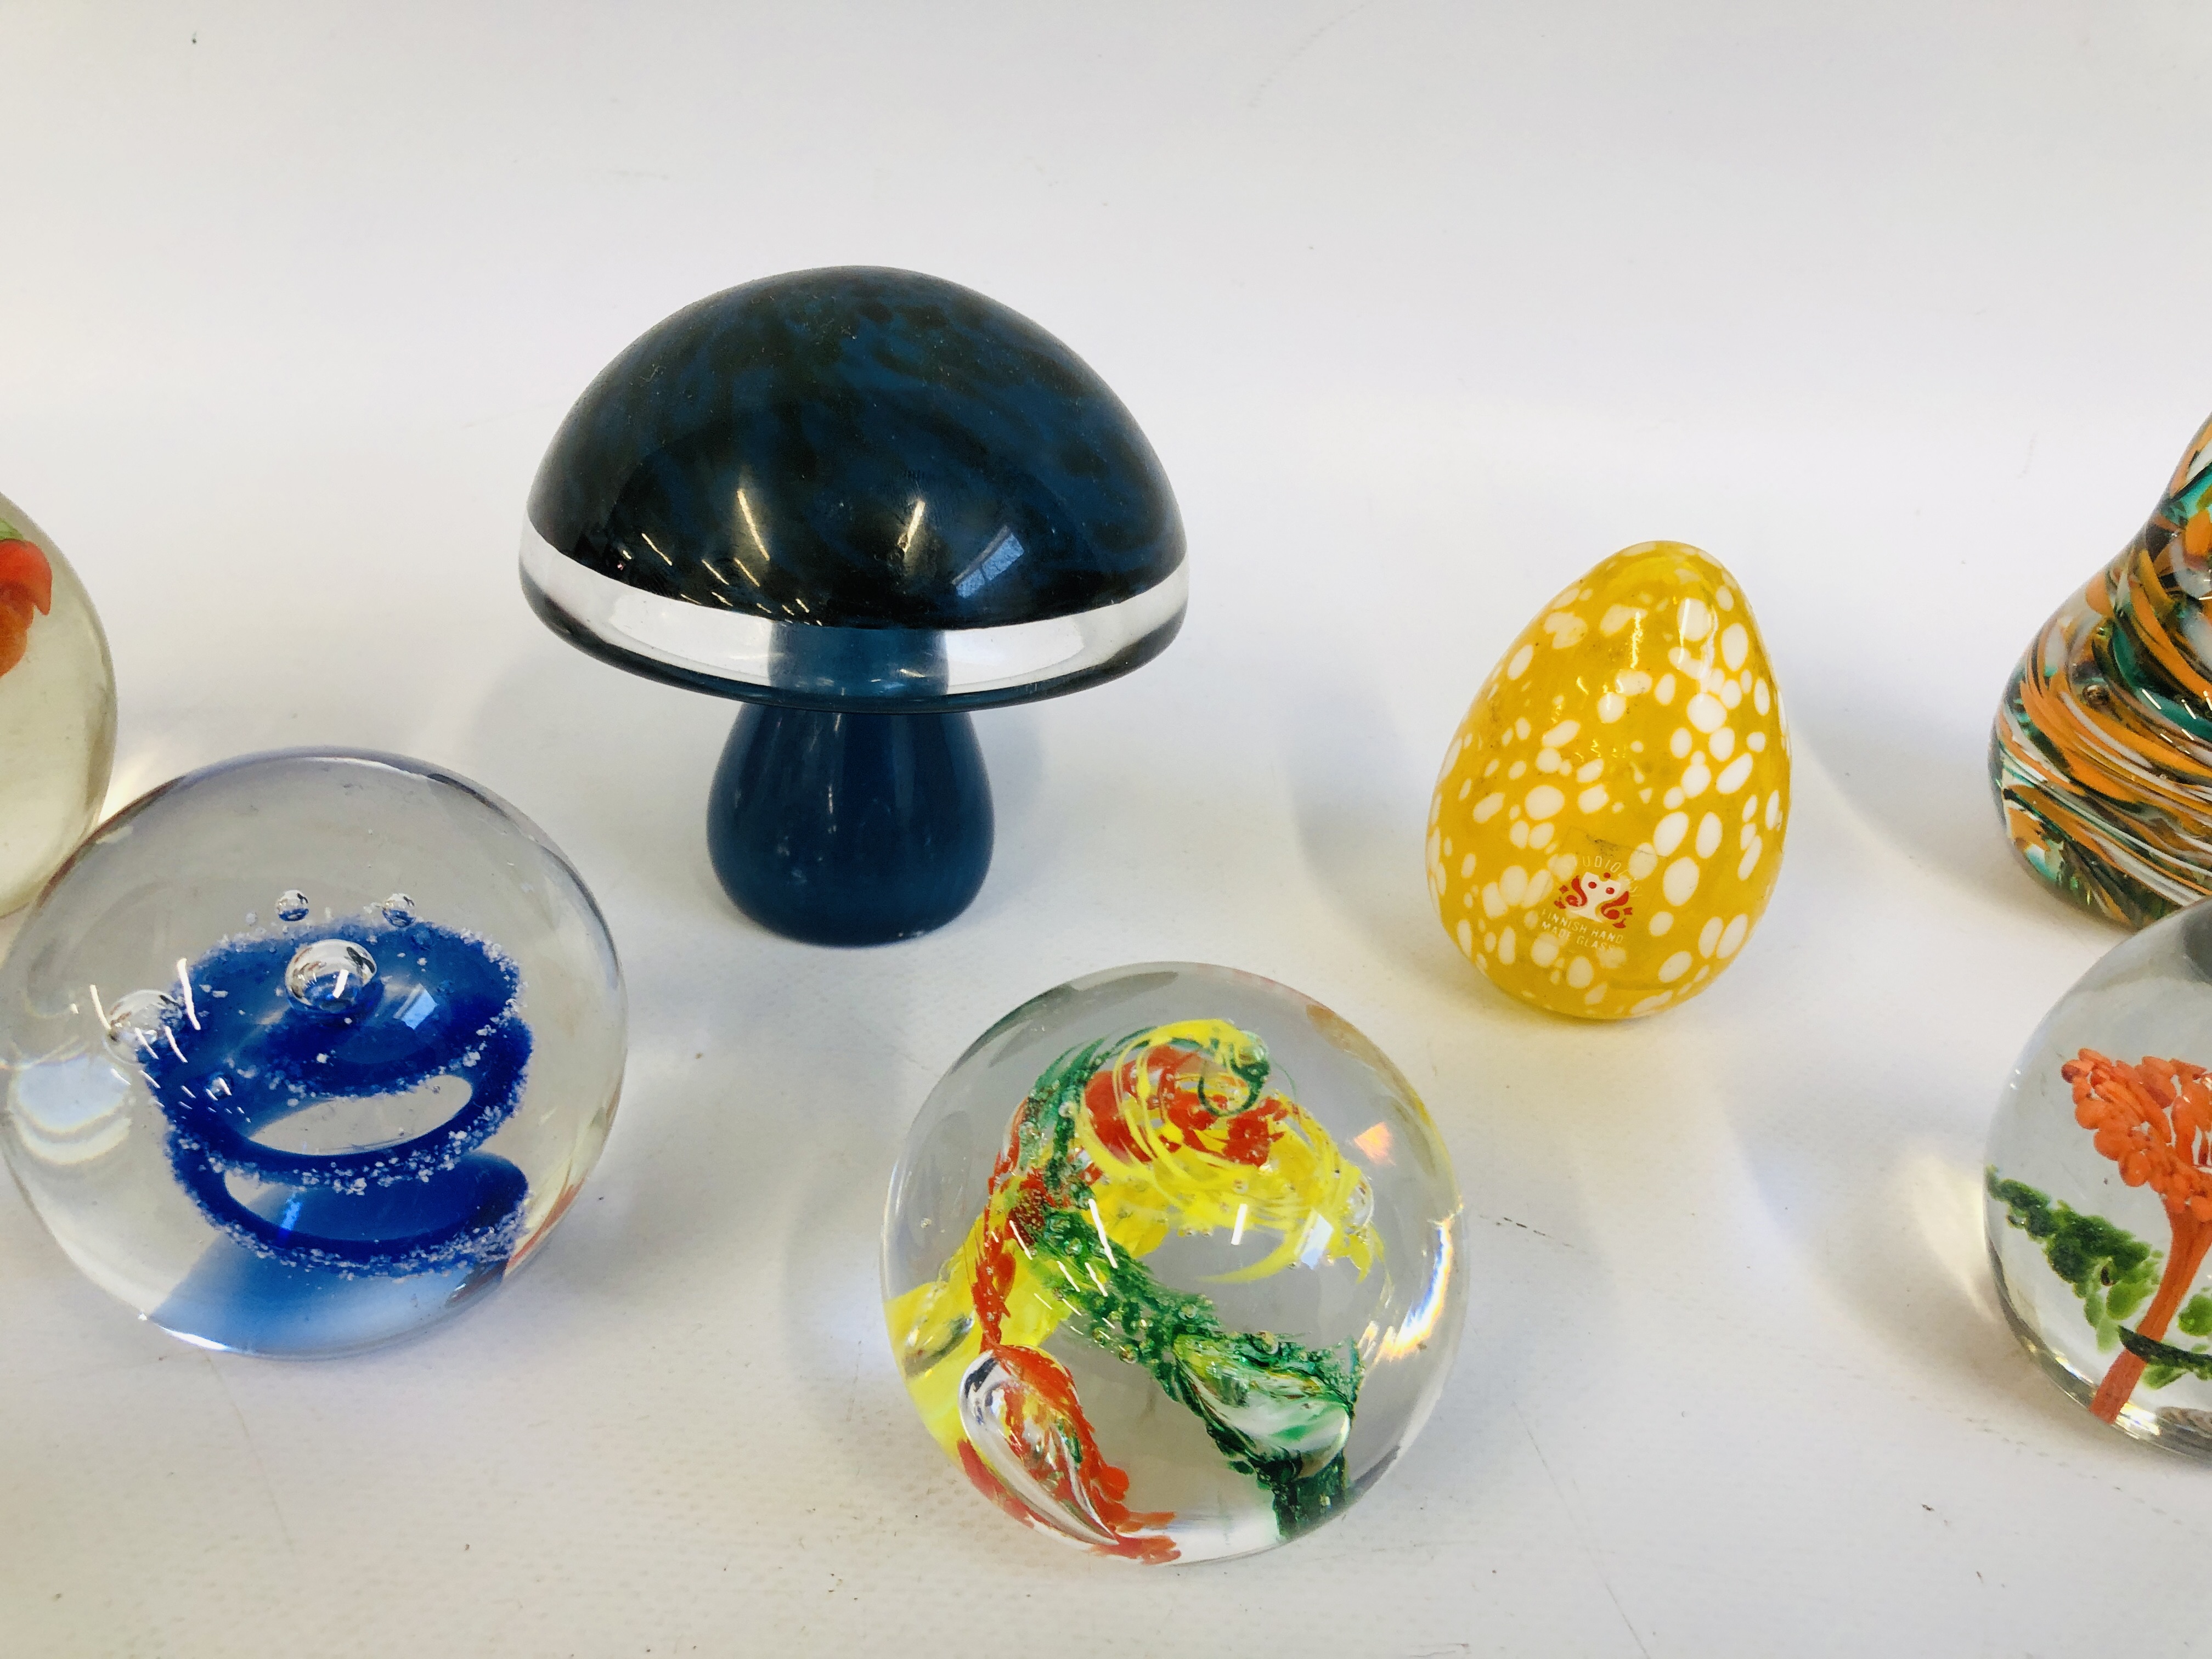 COLLECTION OF 8 ART GLASS PAPERWEIGHTS TO INCLUDE WEDGWOOD MUSHROOM, KERRY GLASS, ETC. - Image 3 of 4